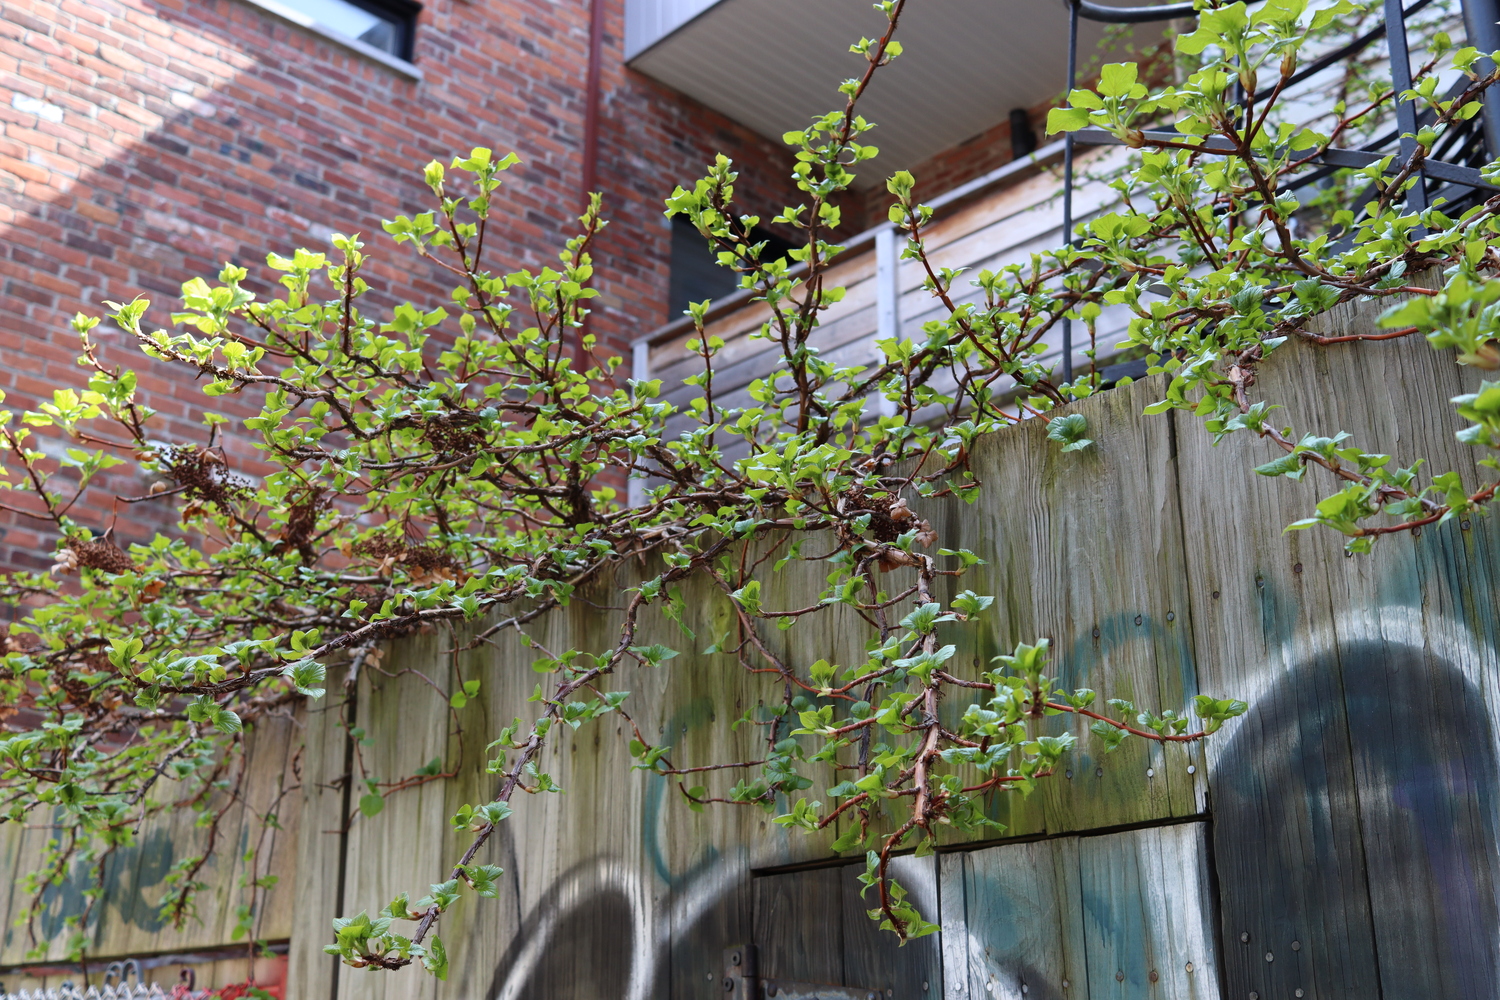 some kind of short tree
spilling over tthe top of an alley wooden fence.
its branches have thorns
and are just started to grow leaves.